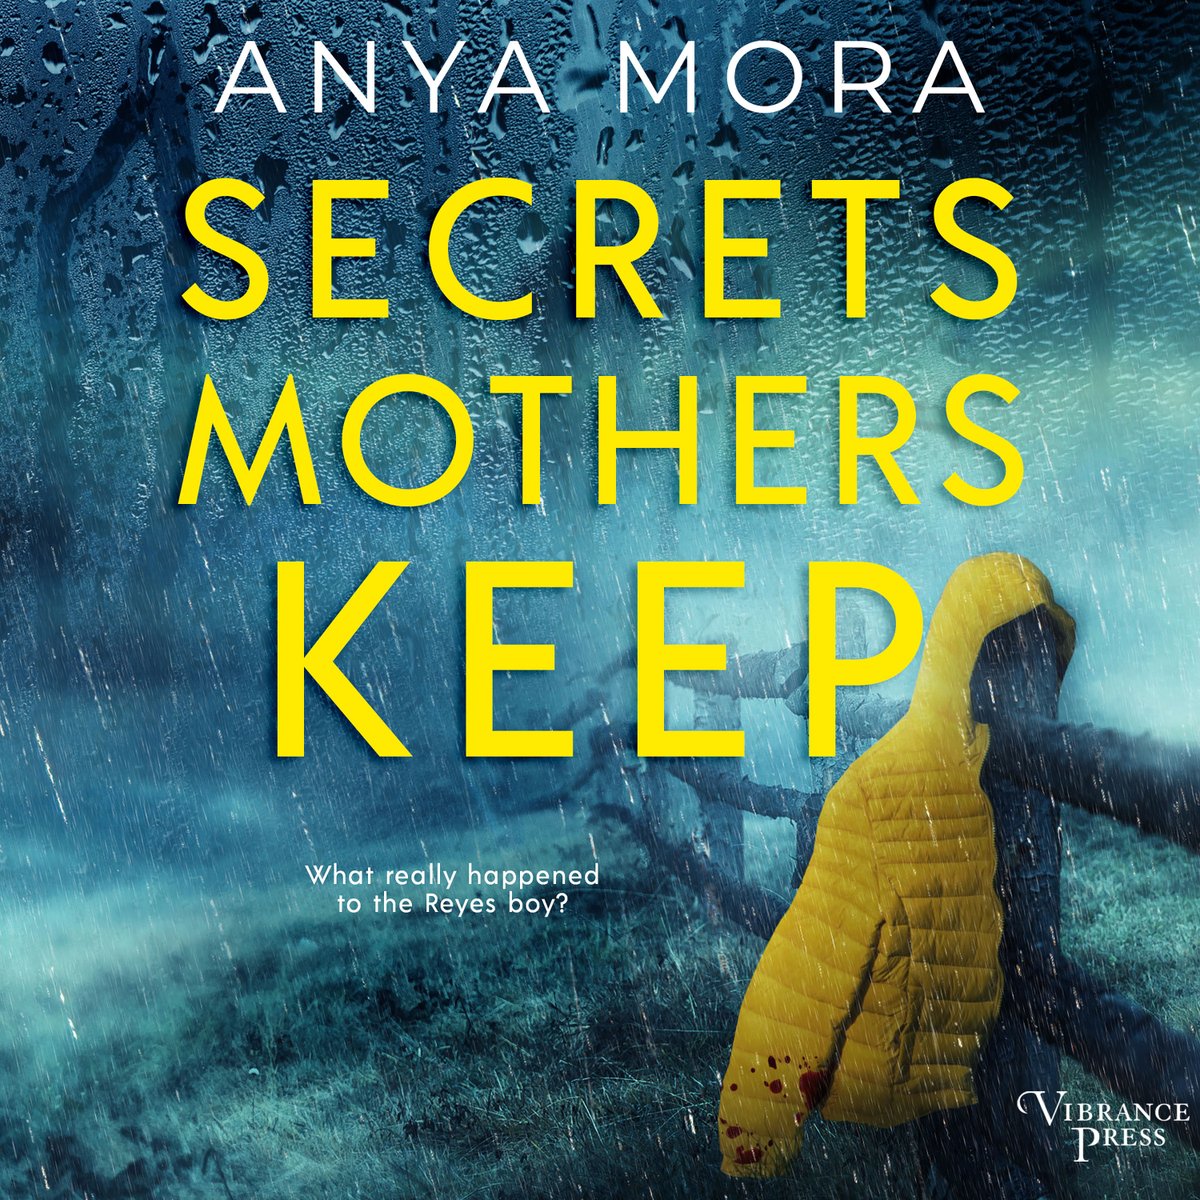 A young boy brutally attacked. Her son the prime suspect. Cora Maxwell must decide - how far do you go to protect your child in SECRETS MOTHERS KEEP, a psychological thriller by Anya Mora, narrated by @JenniferJAraya 

Now in audio from Vibrance

Wherever audiobooks are sold